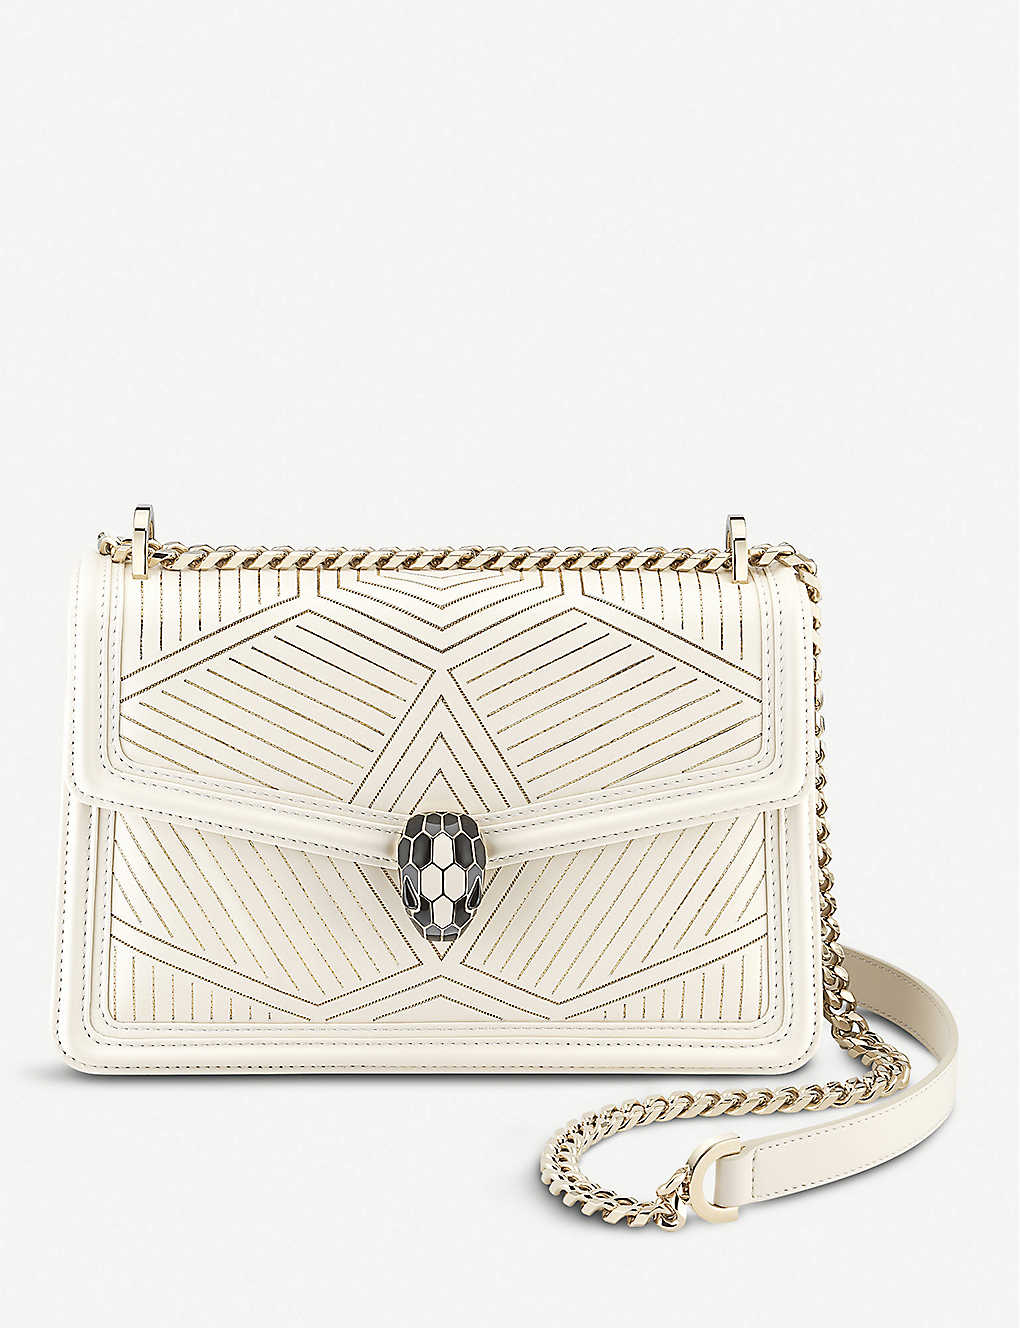 BVLGARI - Serpenti Forever quilted leather shoulder bag